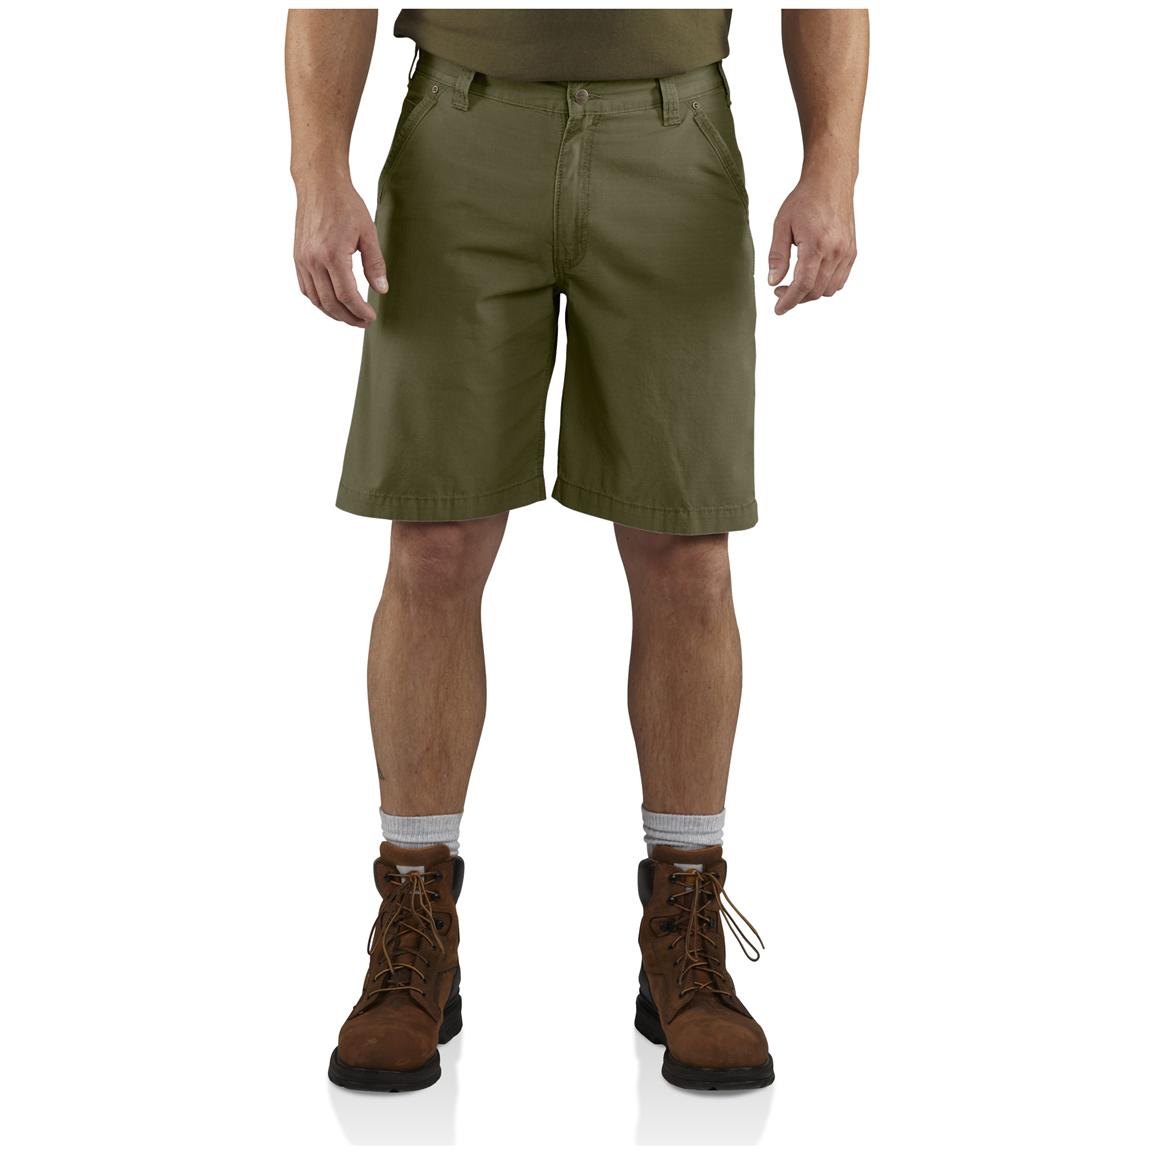 Guide Gear Men's Outdoor Cargo Shorts - 578129, Shorts at Sportsman's Guide